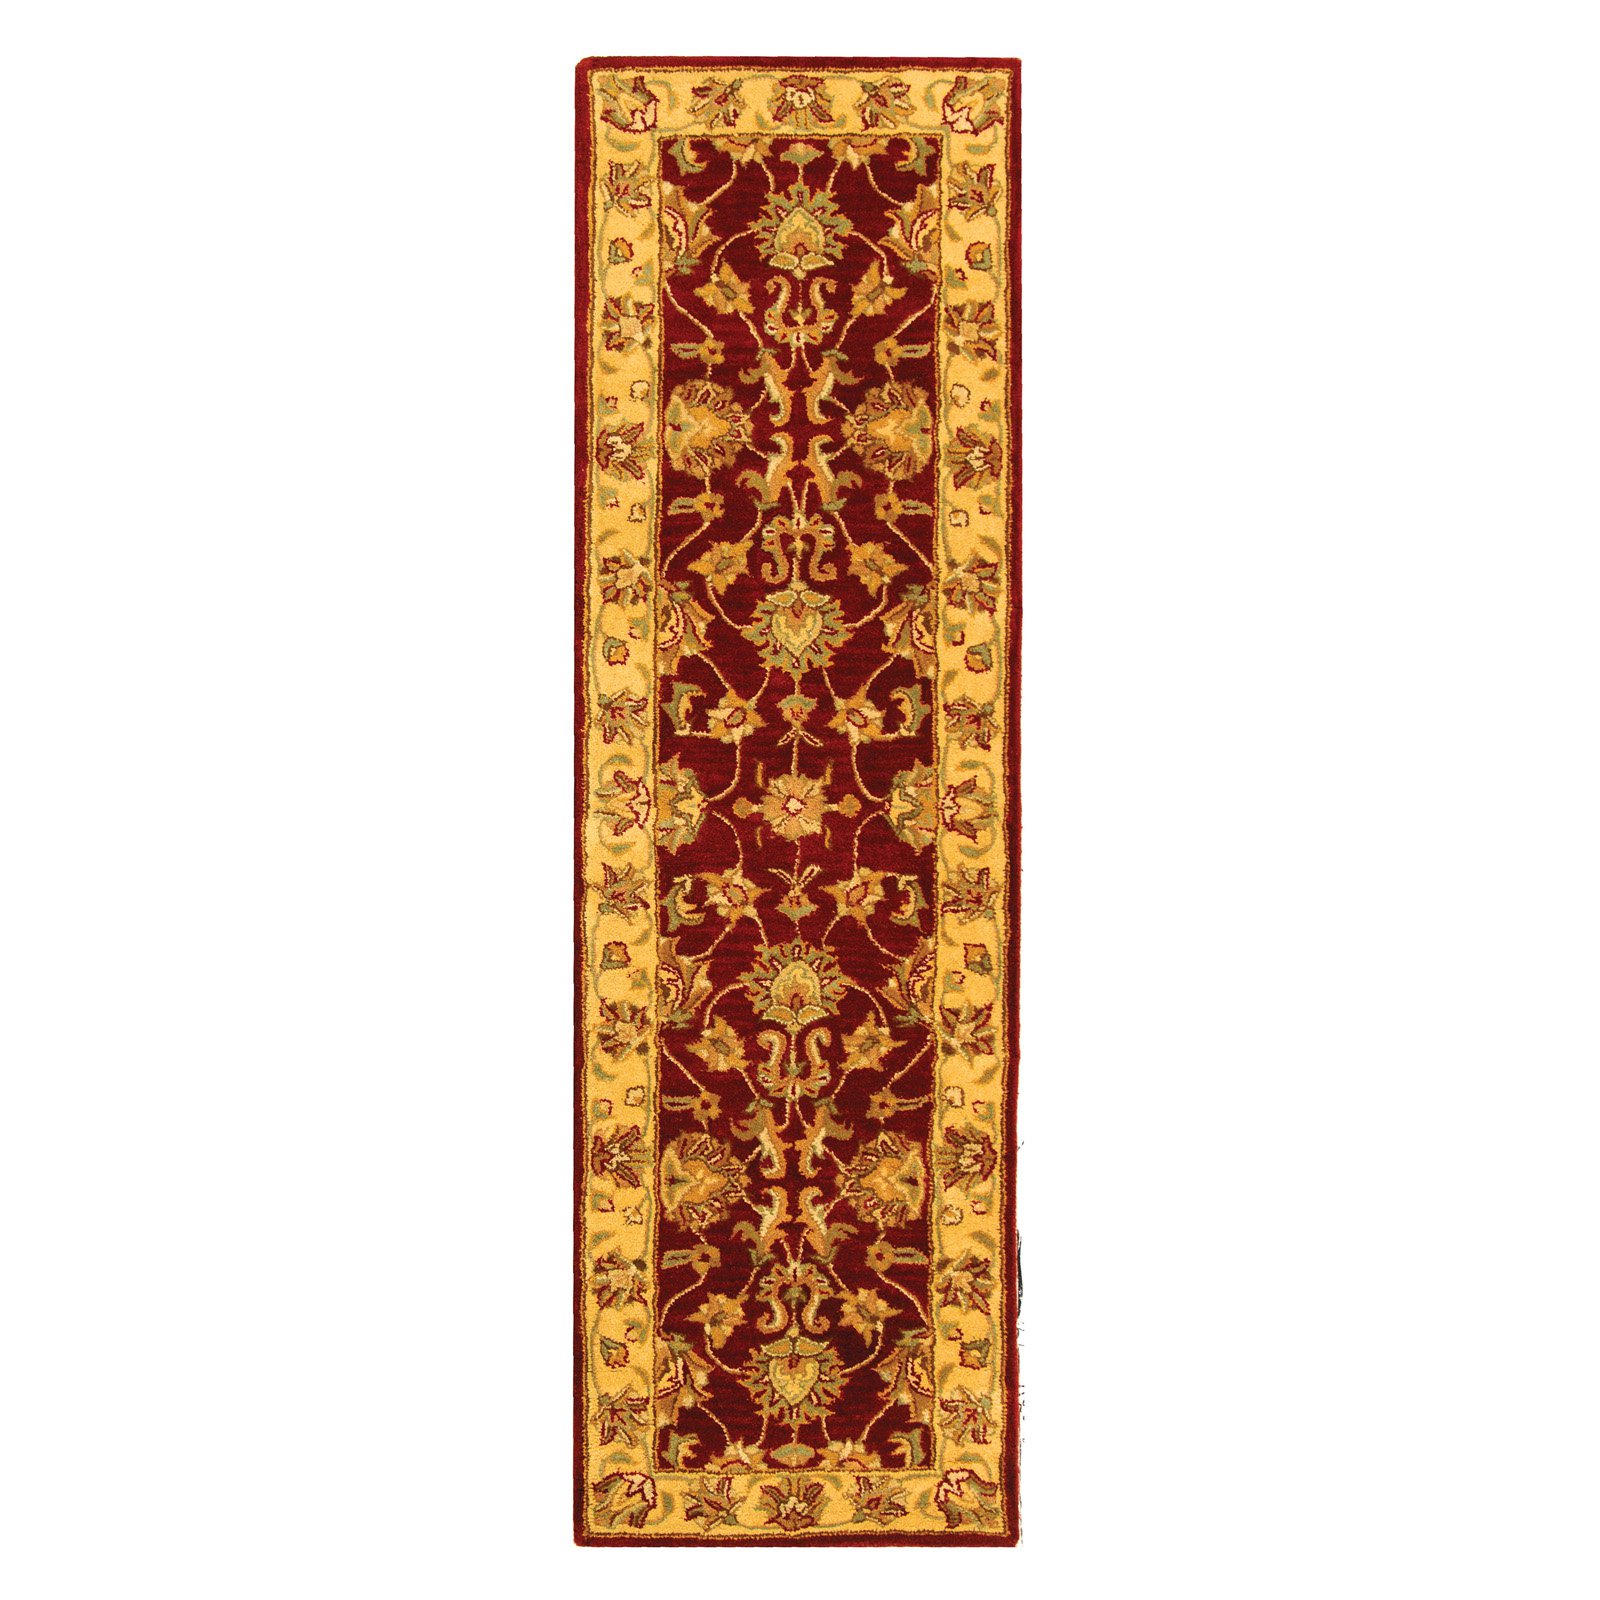 SAFAVIEH Heritage Regis Traditional Wool Area Rug, Red/Gold, 2' x 3' - image 3 of 9